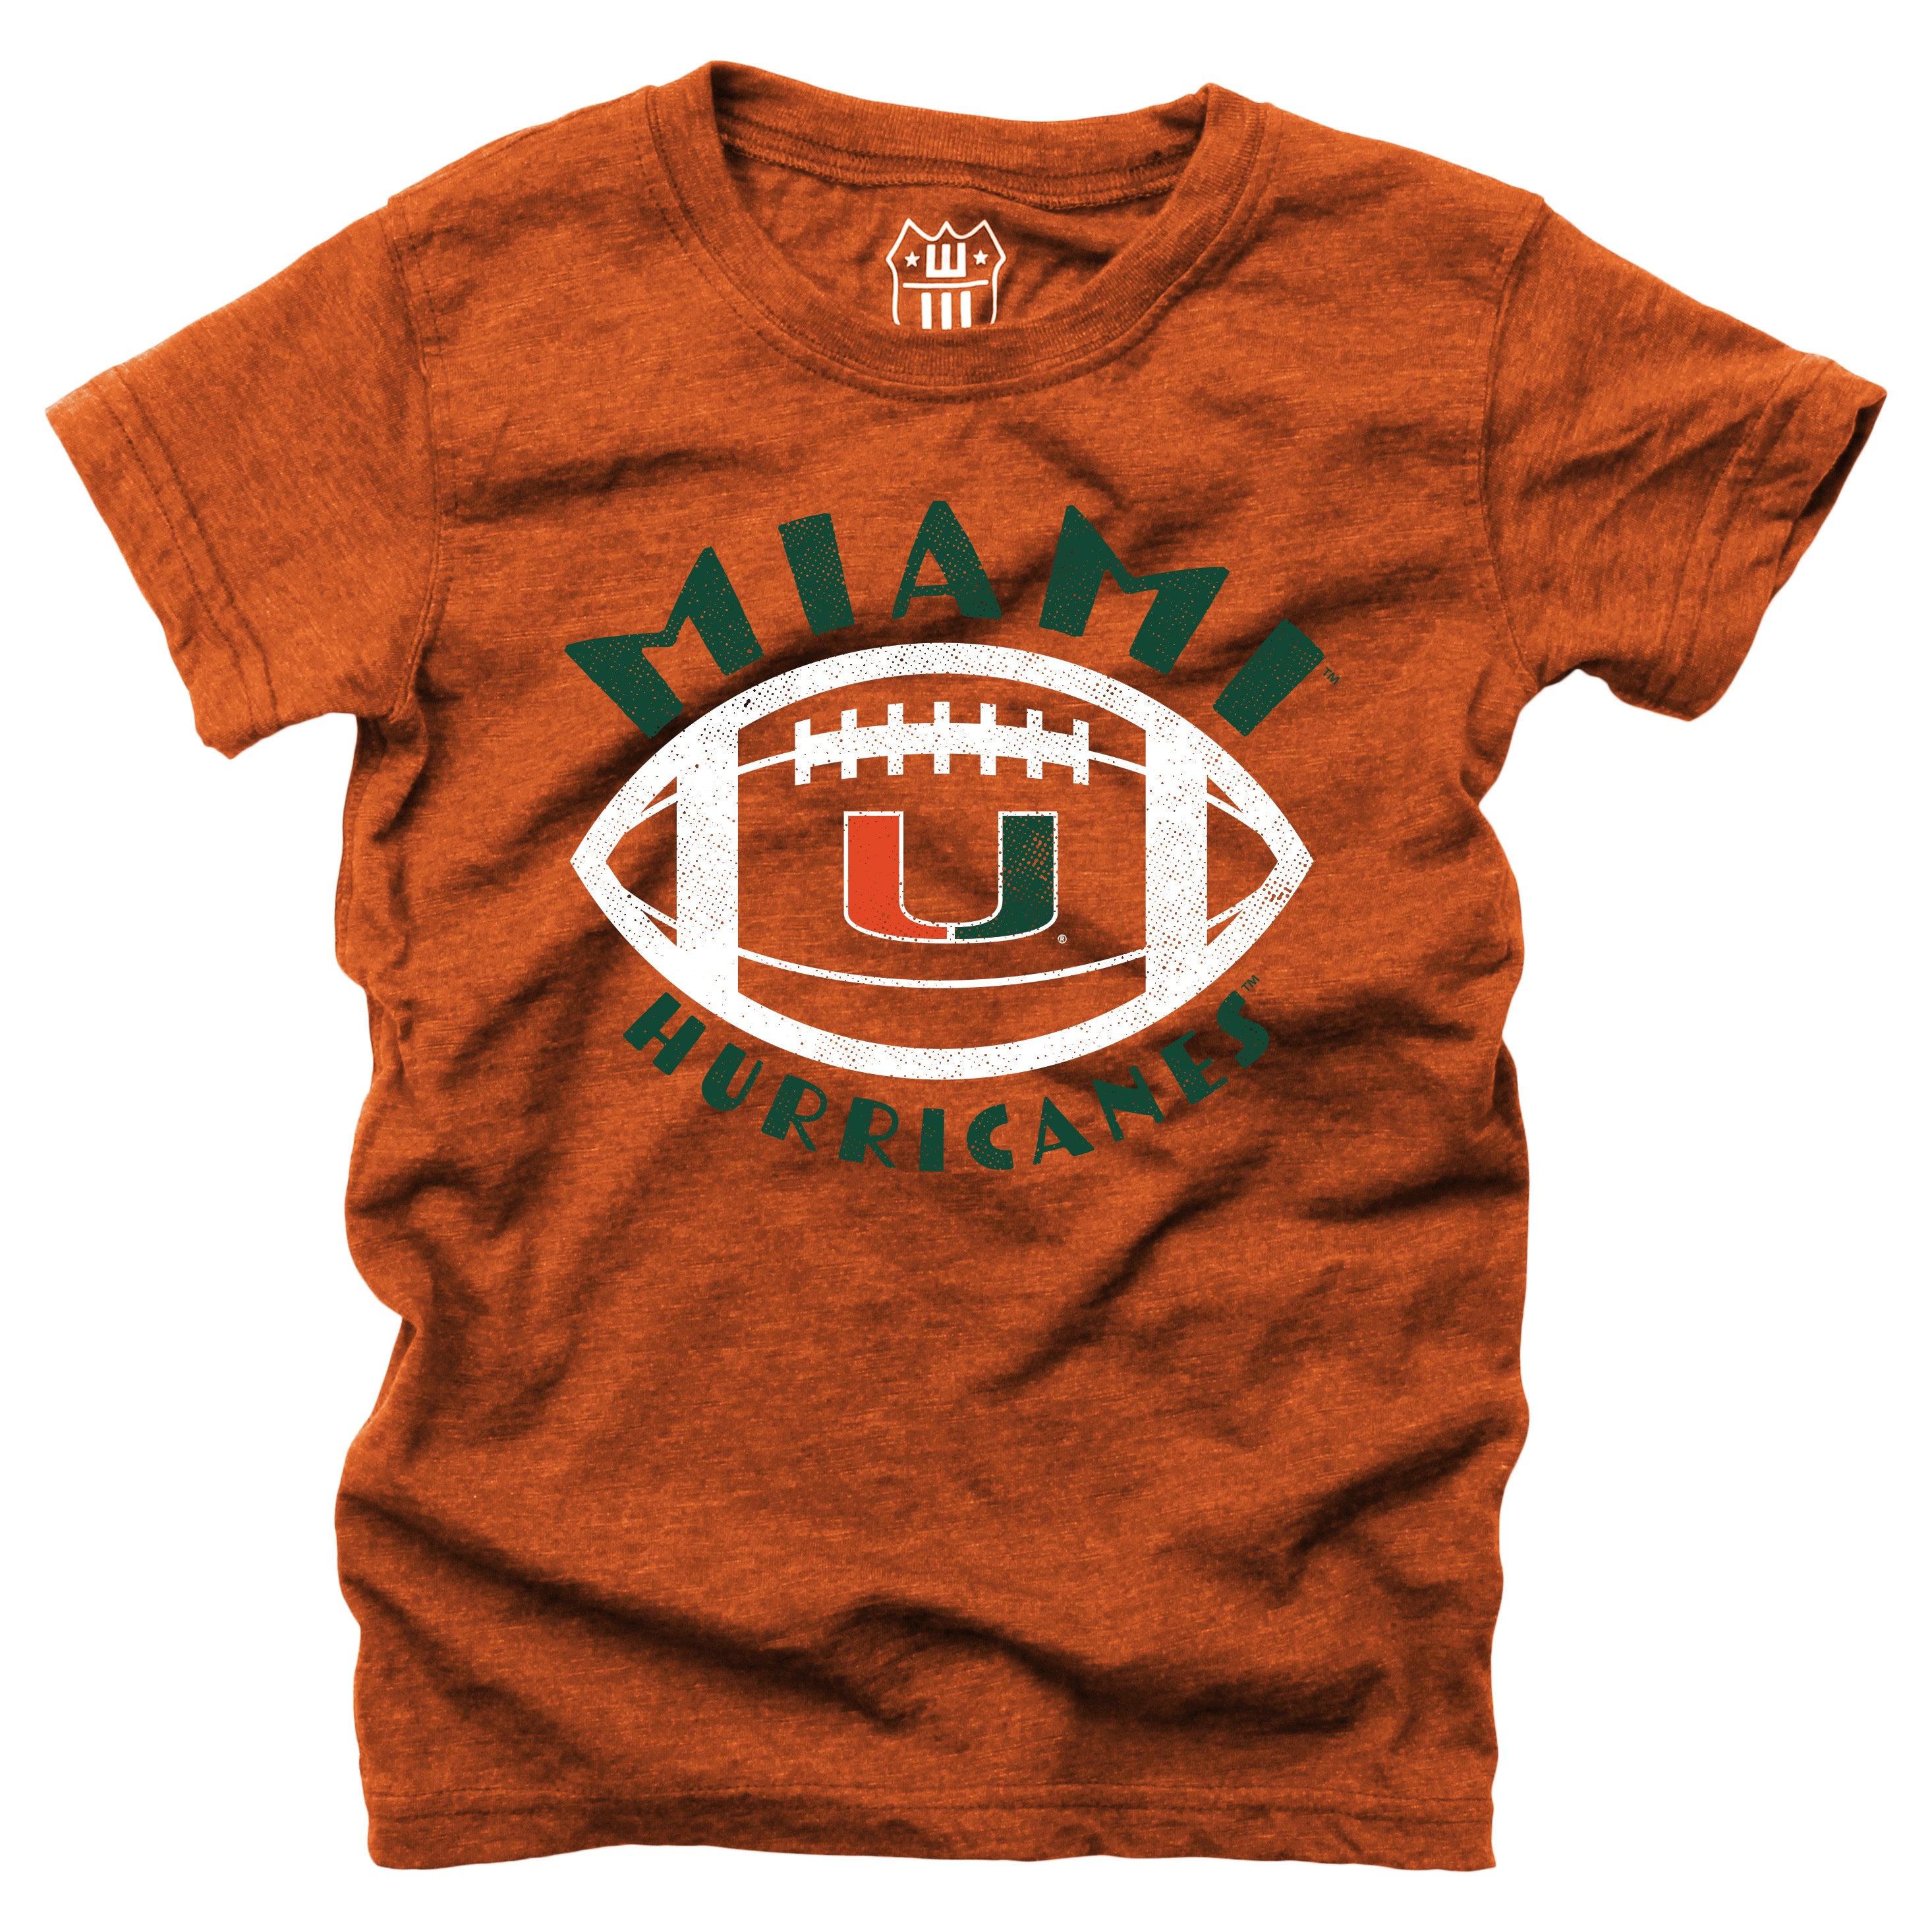 Miami Hurricanes Wes And Willy Infant & Toddler Tri-Blend T-Shirt - Orange Crush